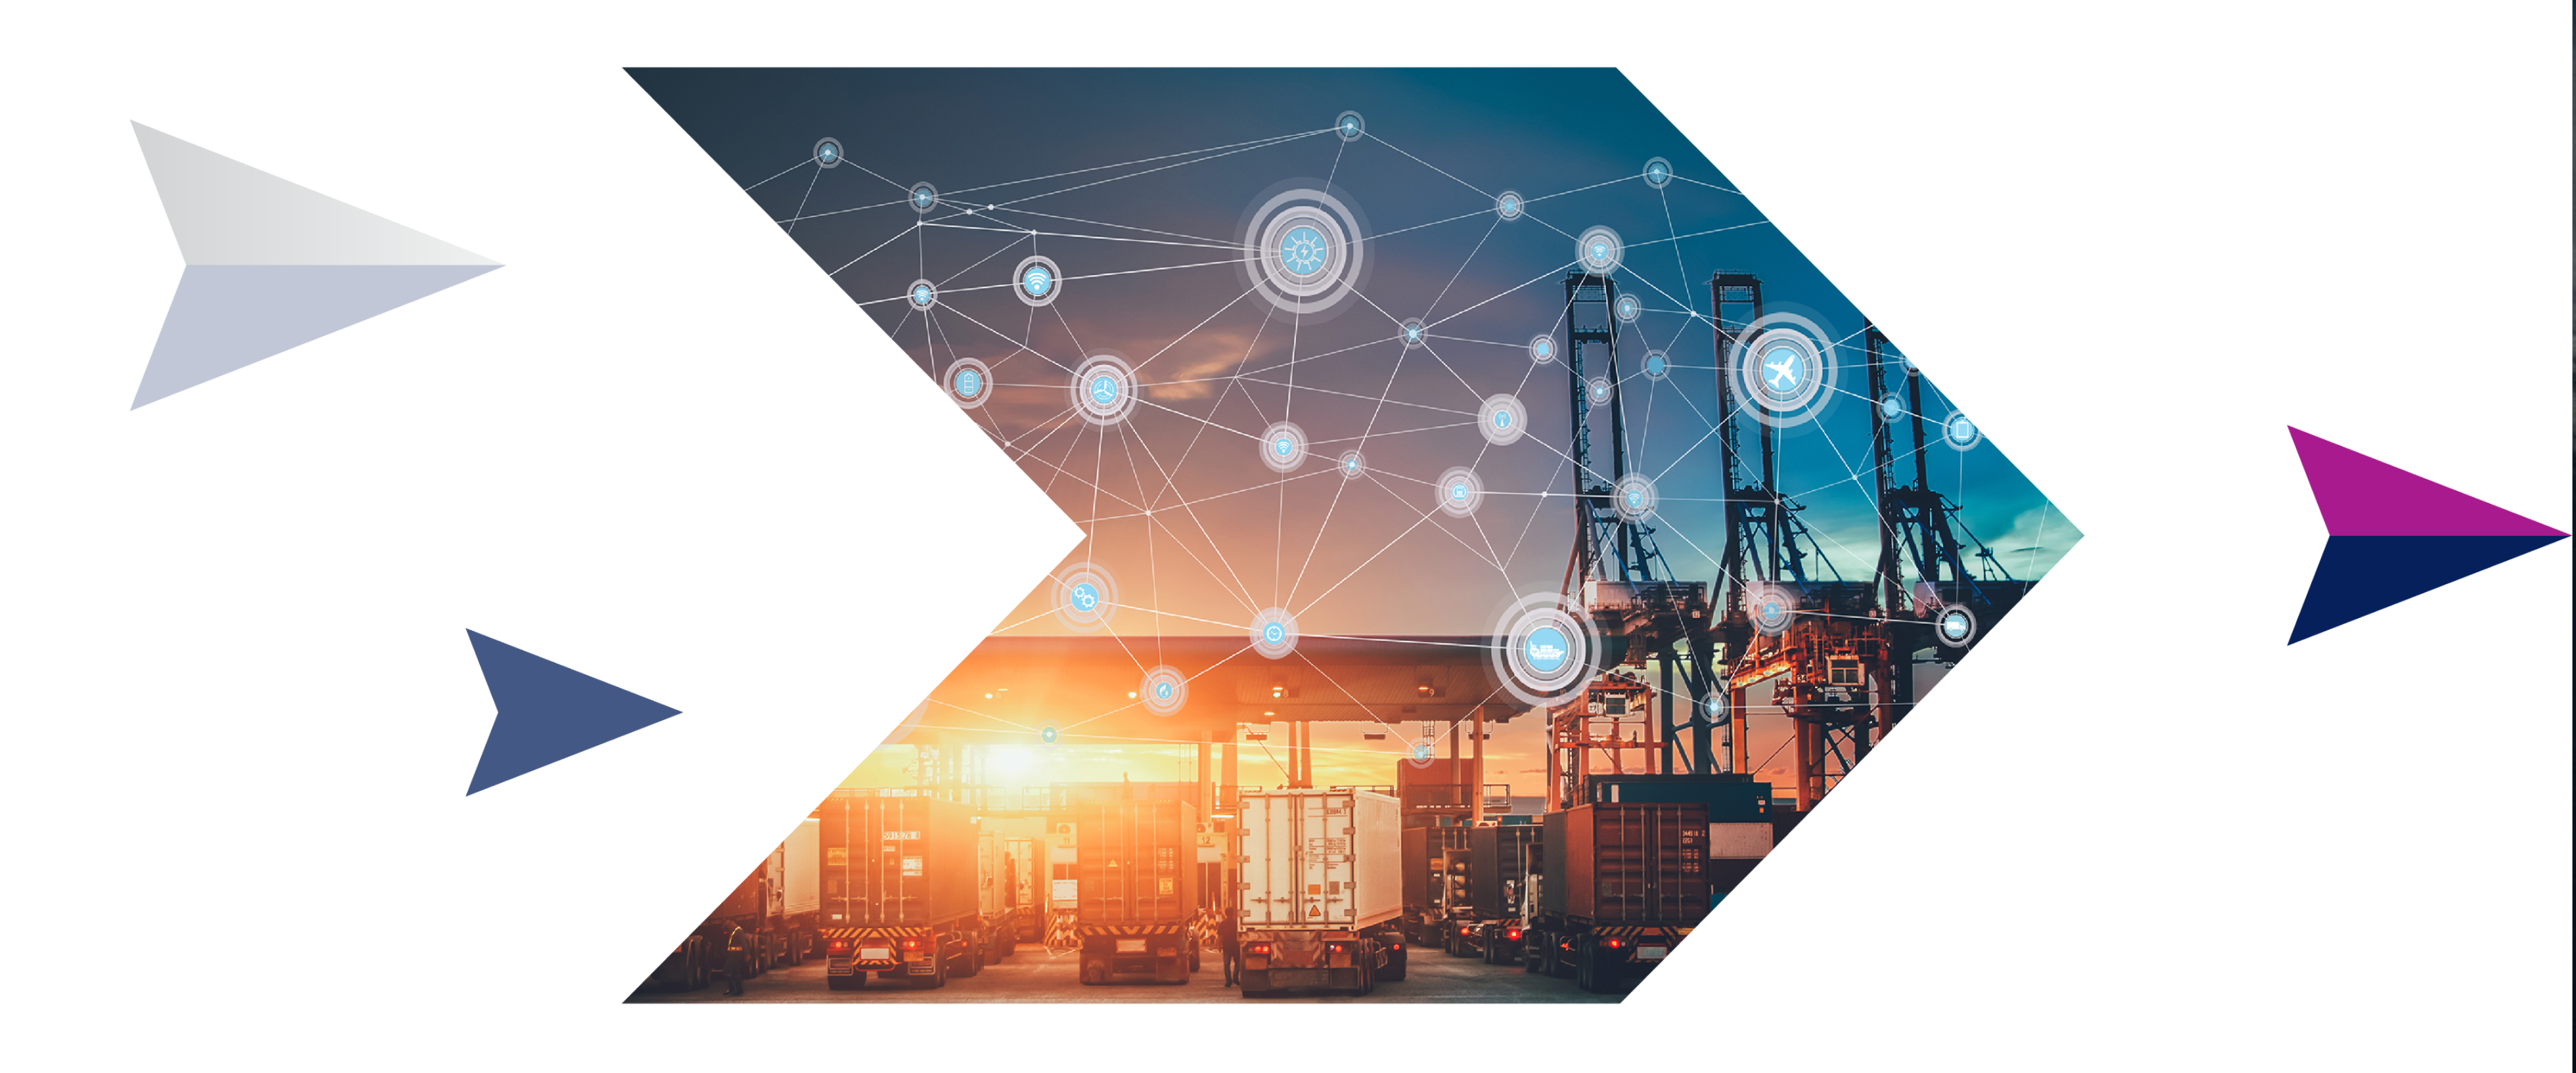 A digitalized logistics ecosystem is necessary to sustain the movement of vital shipments in an increasingly interconnected global marketplace